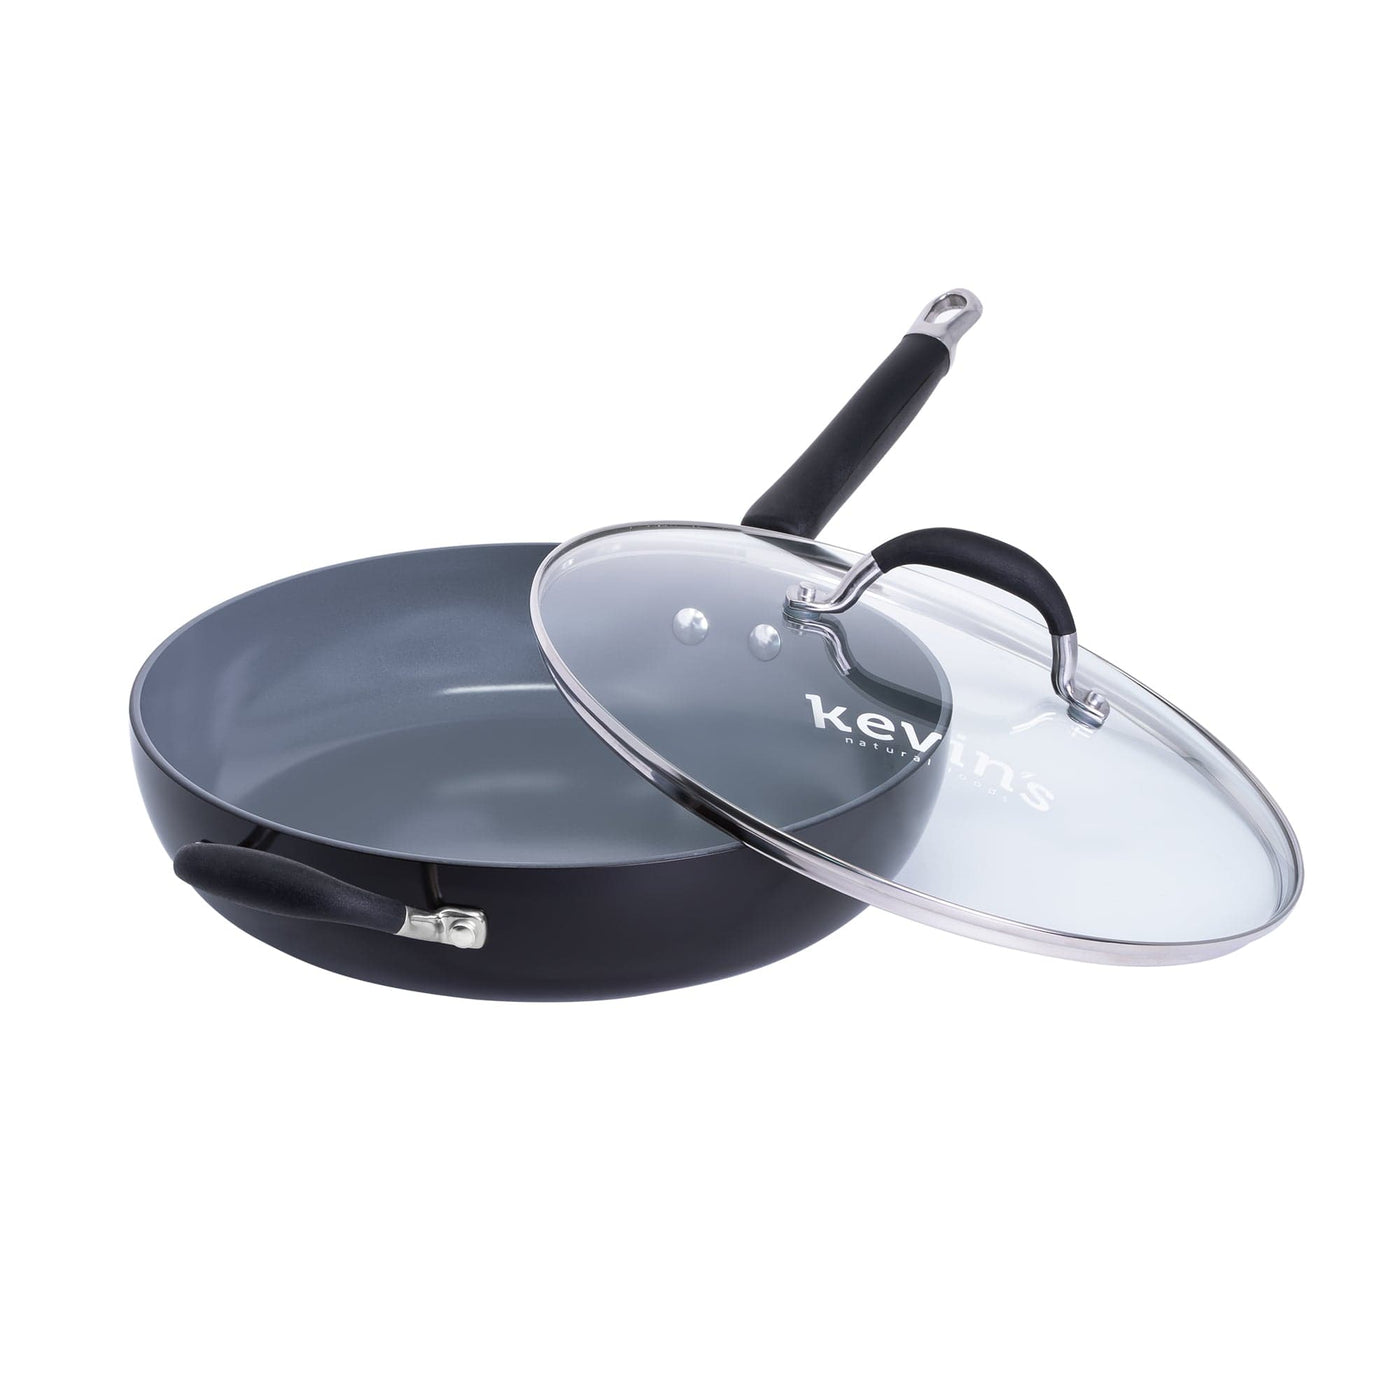 Kevin's Clean Pan with Lid